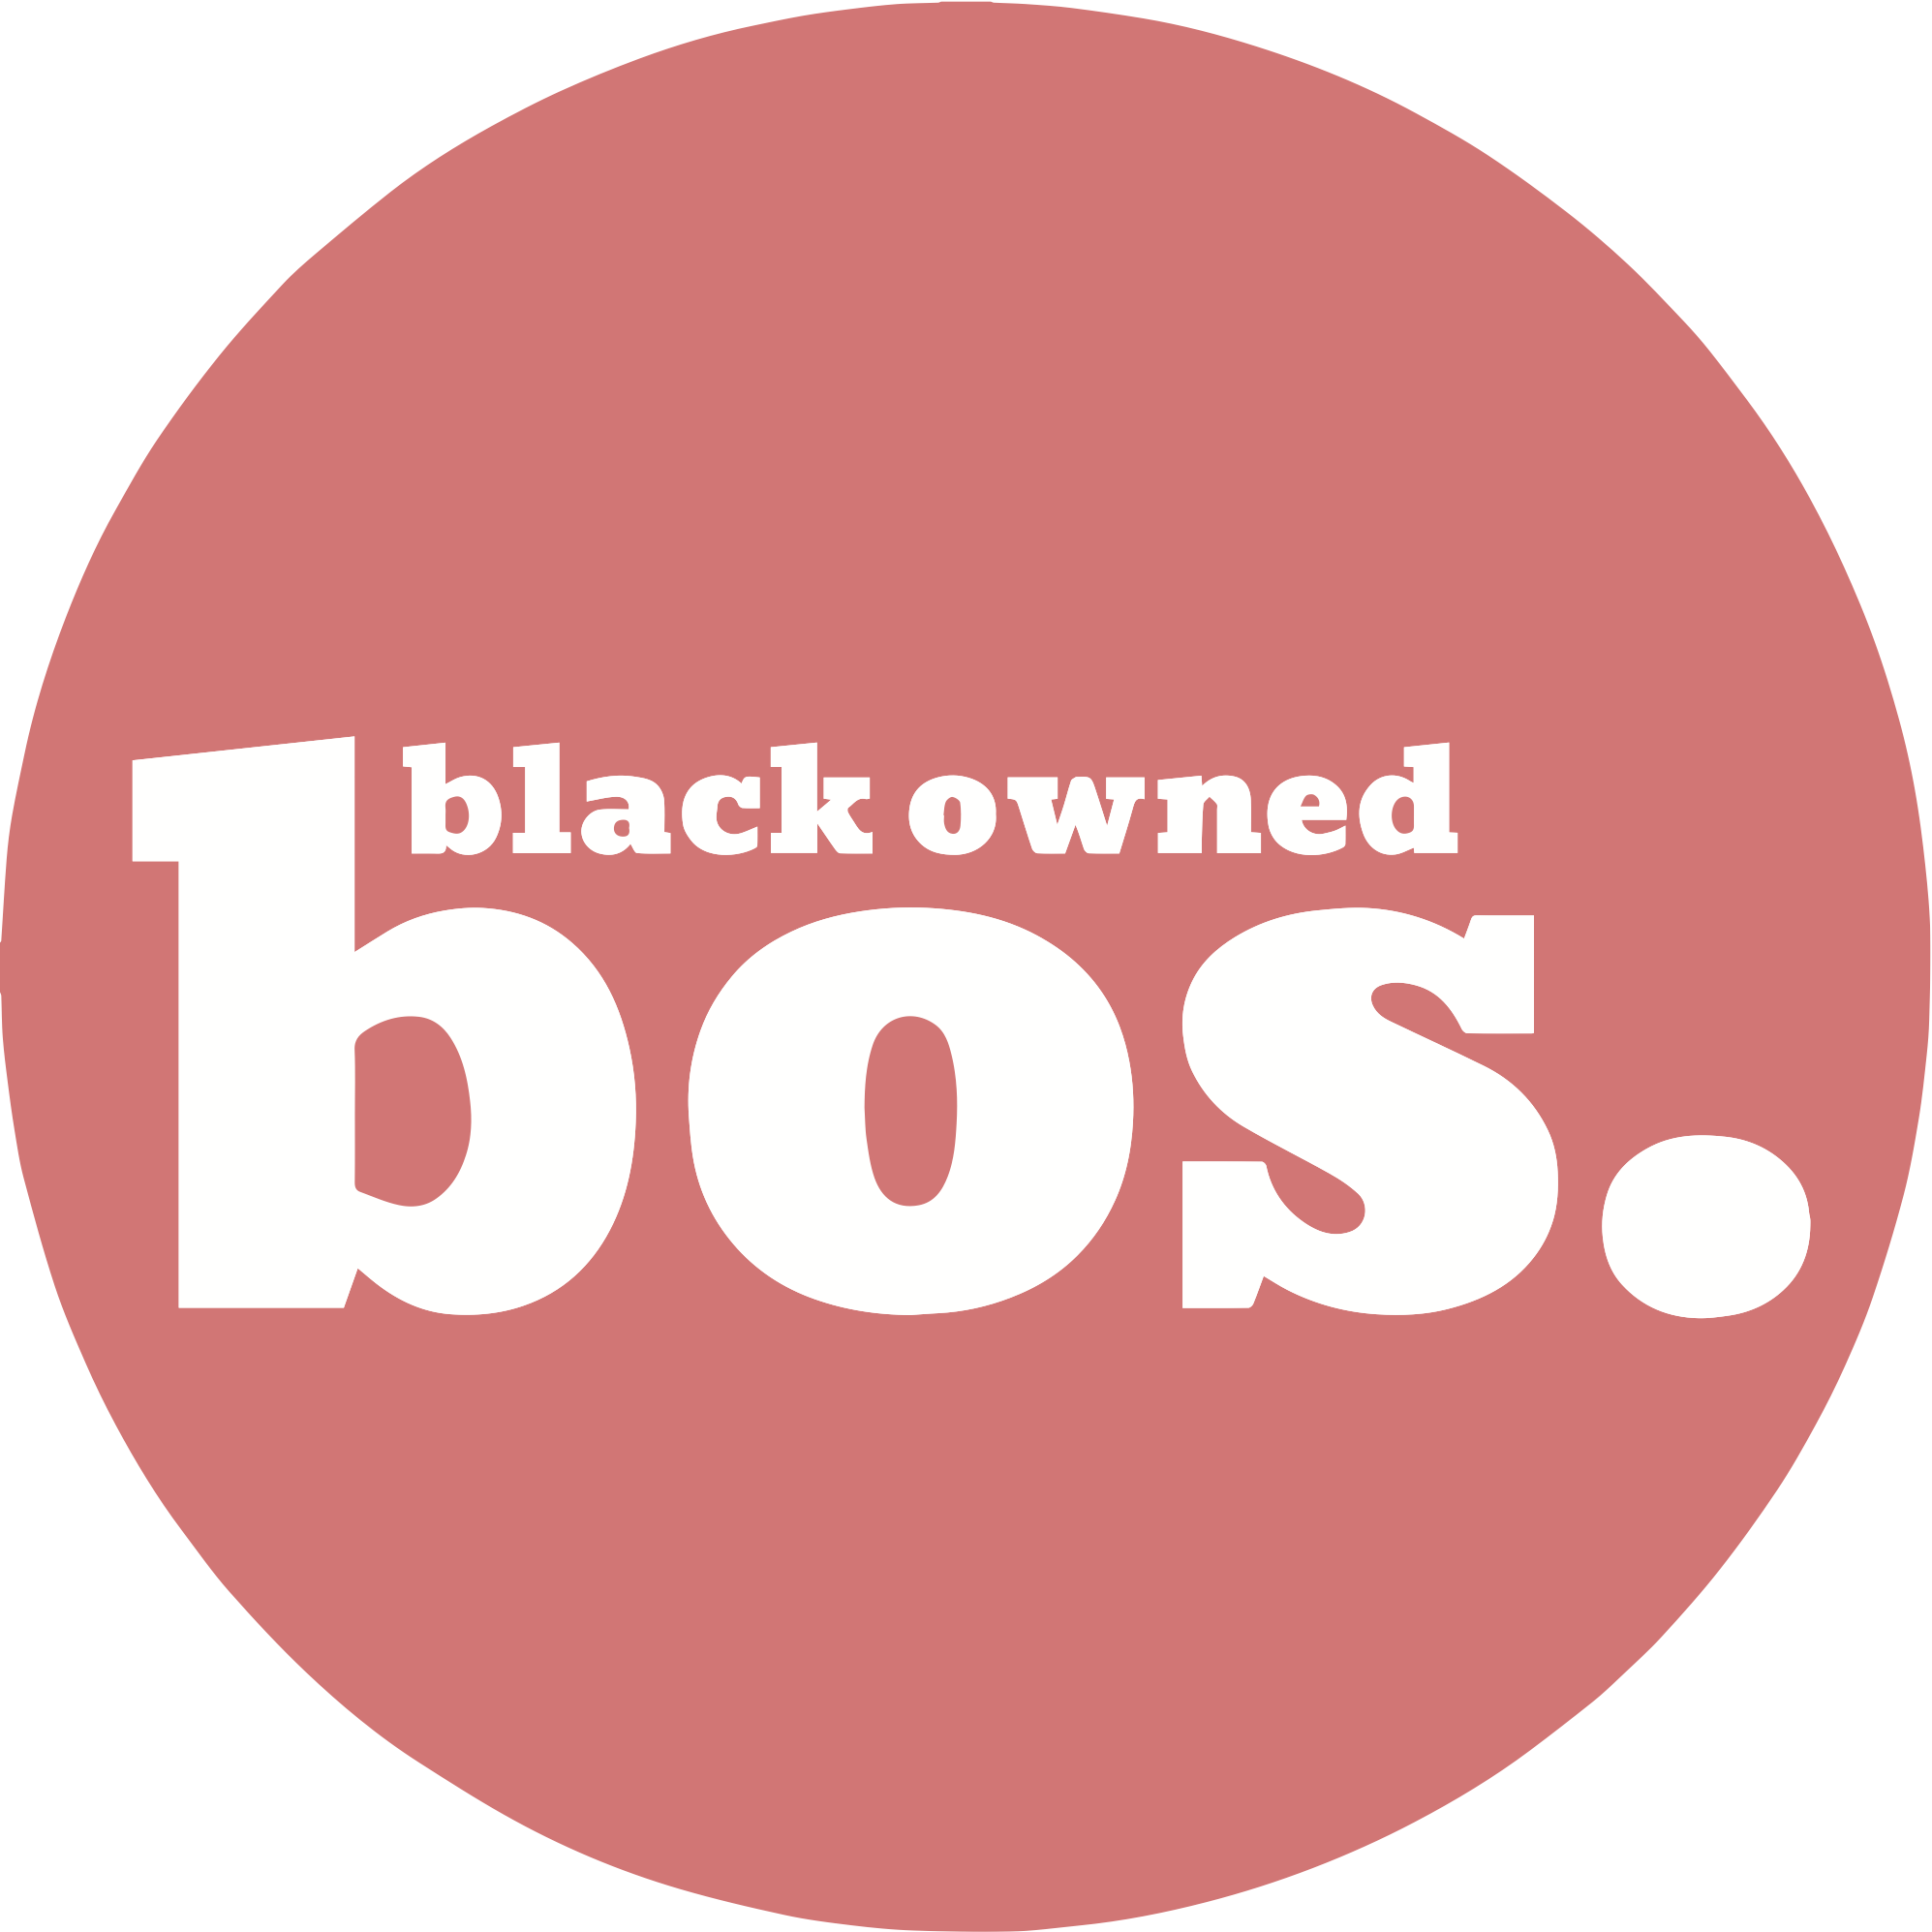 Black Owned Bos.